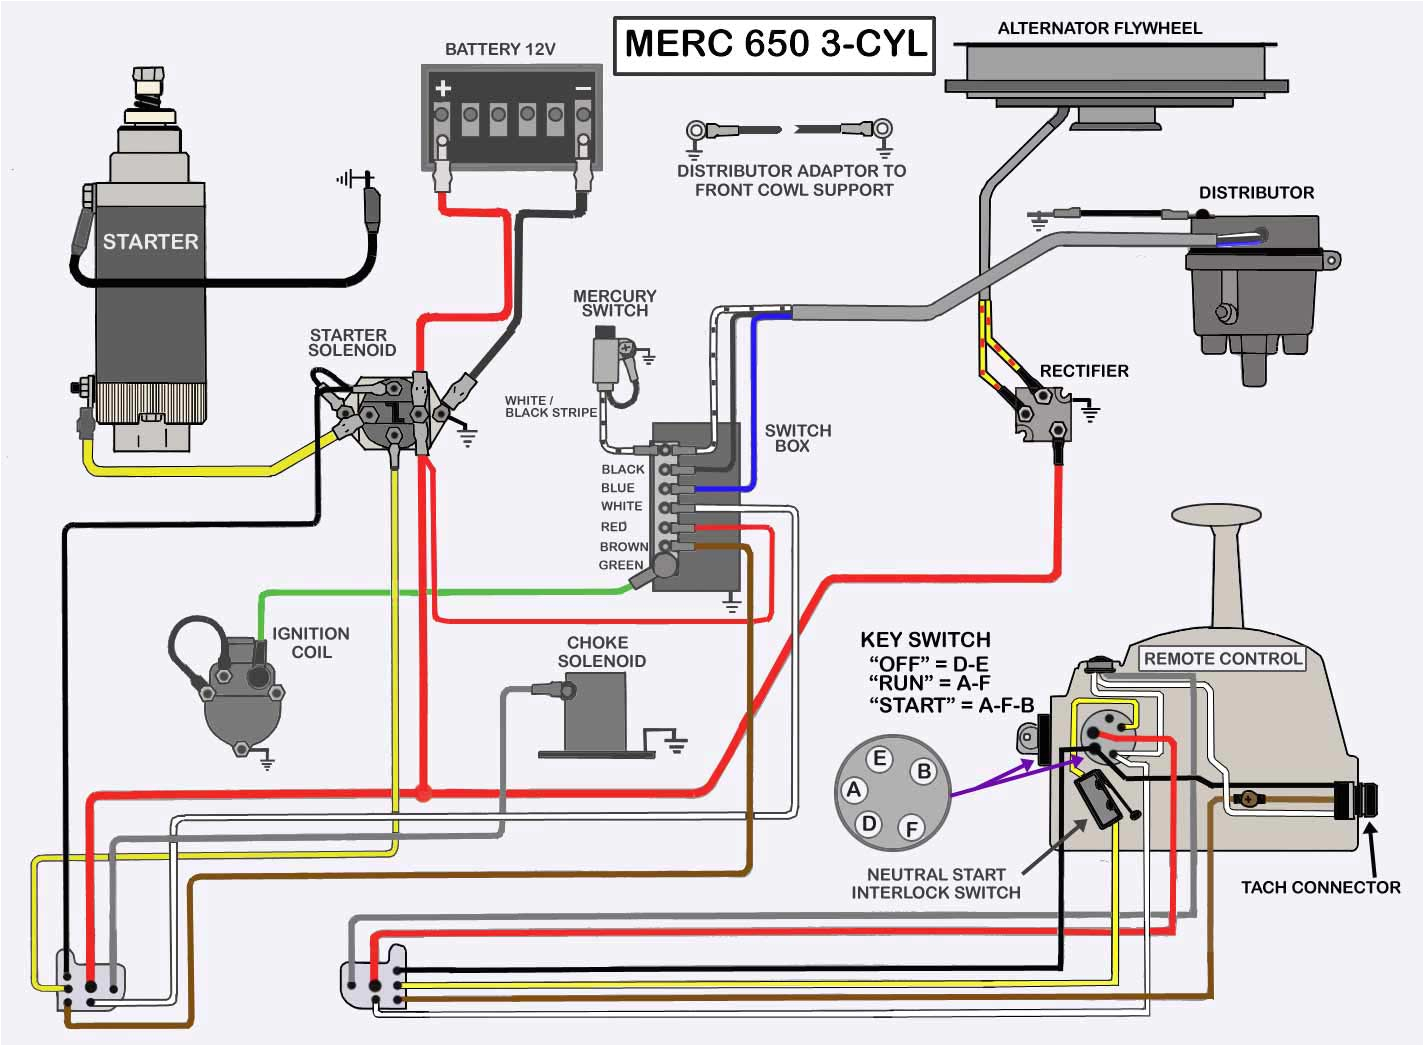 40 hp mercury outboard wiring diagram hecho wiring diagram load 40 hp mercury outboard wiring diagram hecho